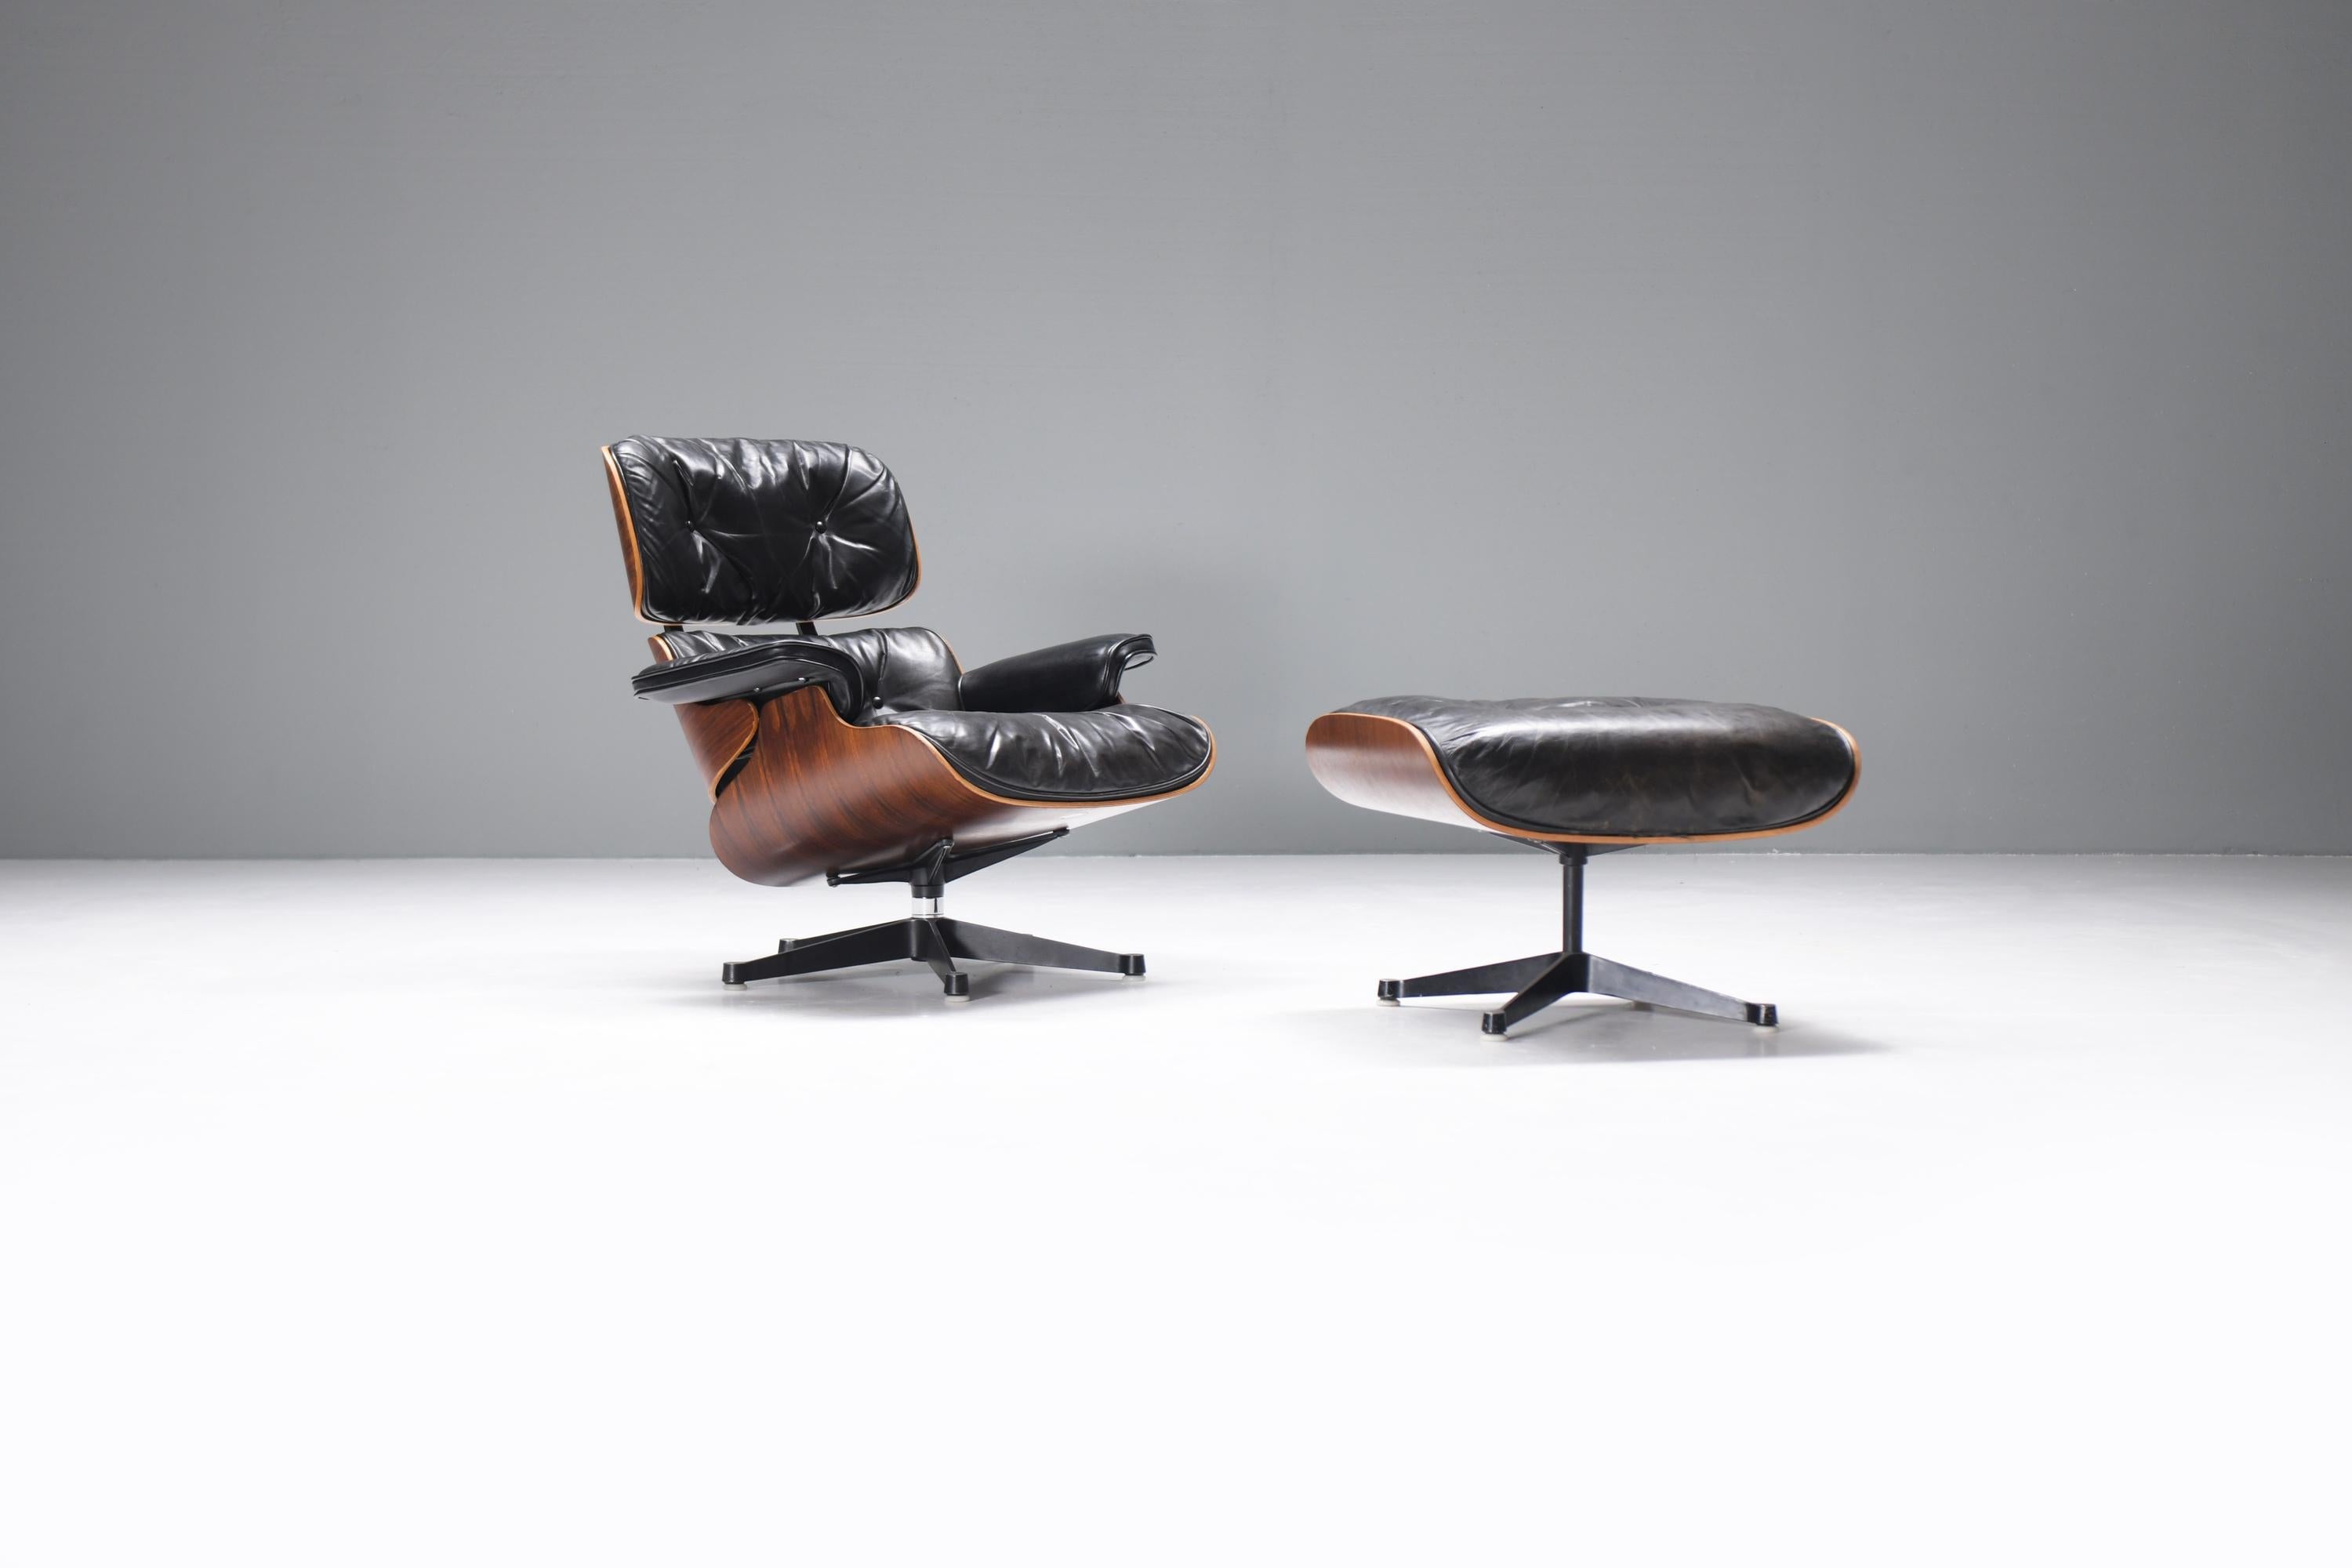 20th Century Eames lounge by Ray & Charles Eames by Mobilier International for Herman Miller